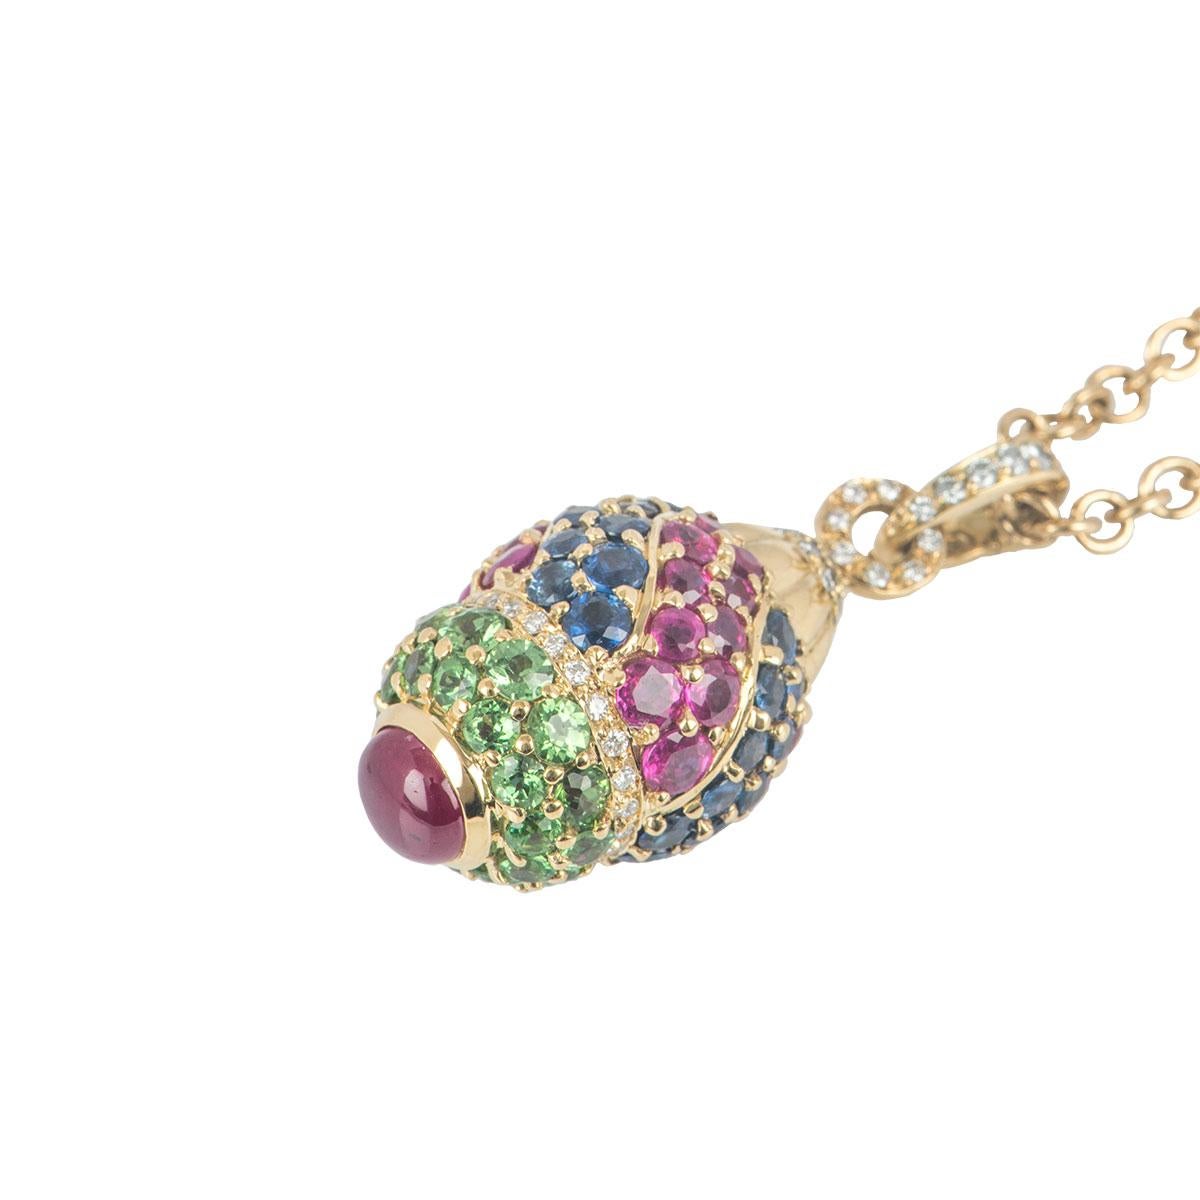 An 18k yellow gold diamond and multi gem egg pendant. The pendant features round brilliant cut diamonds in a pave setting on the bail, head and middle of the pendant. The chain of the pendant contains 6 sapphires evenly spaced apart, with sapphires